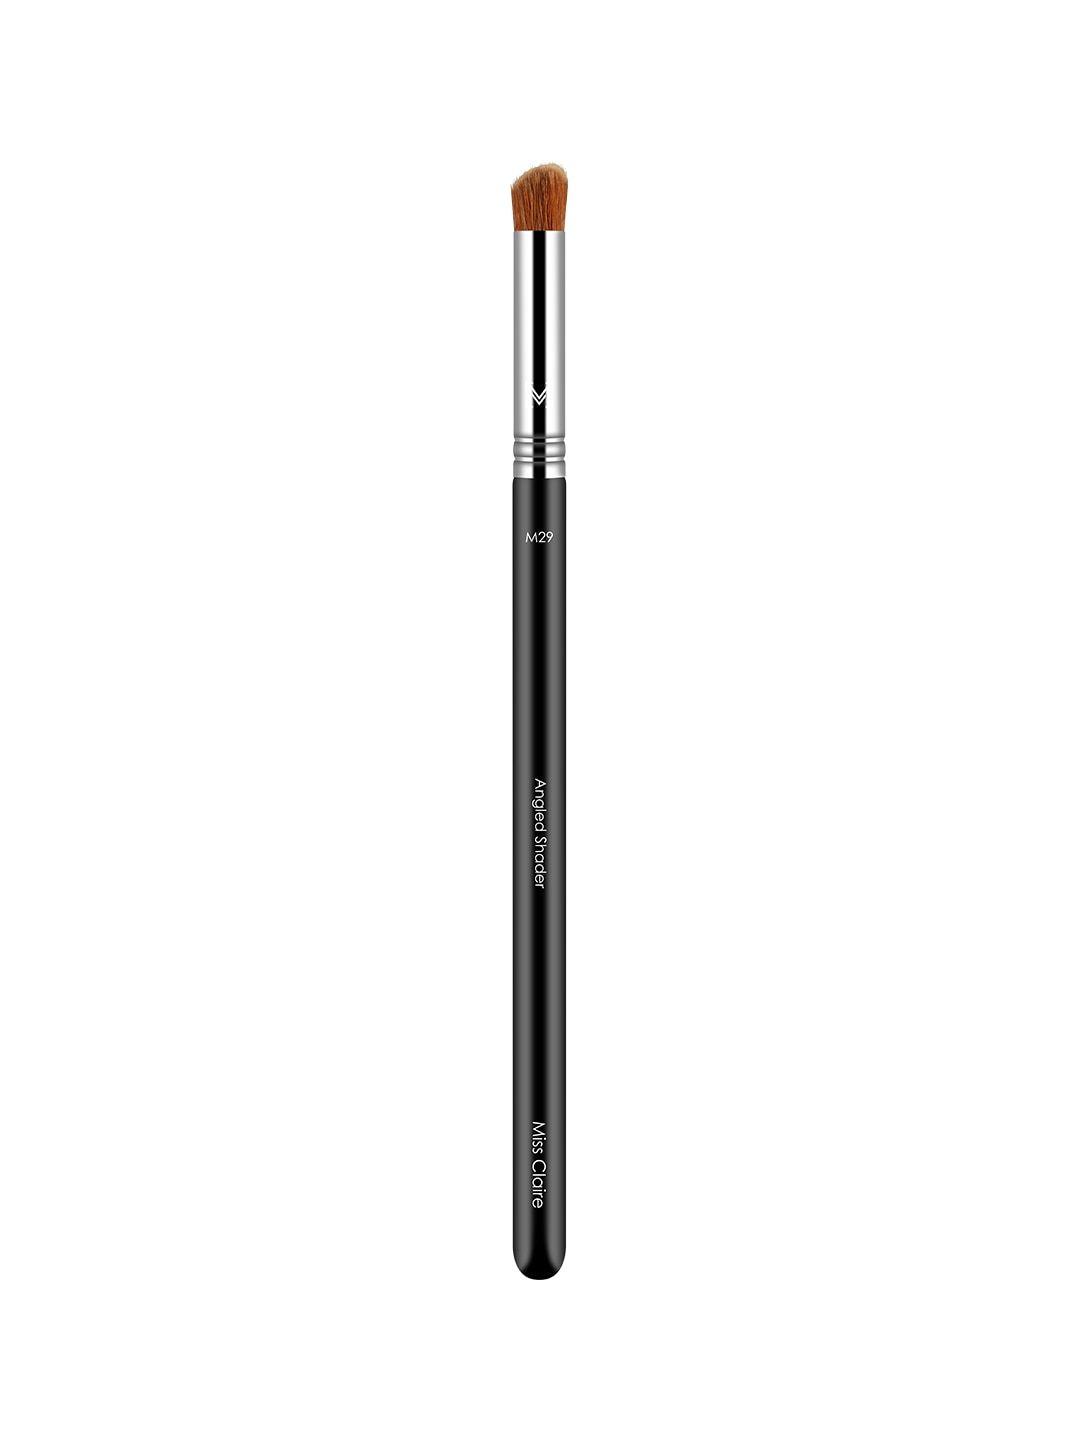 miss claire chrome angled shader brush - m29 black & silver toned